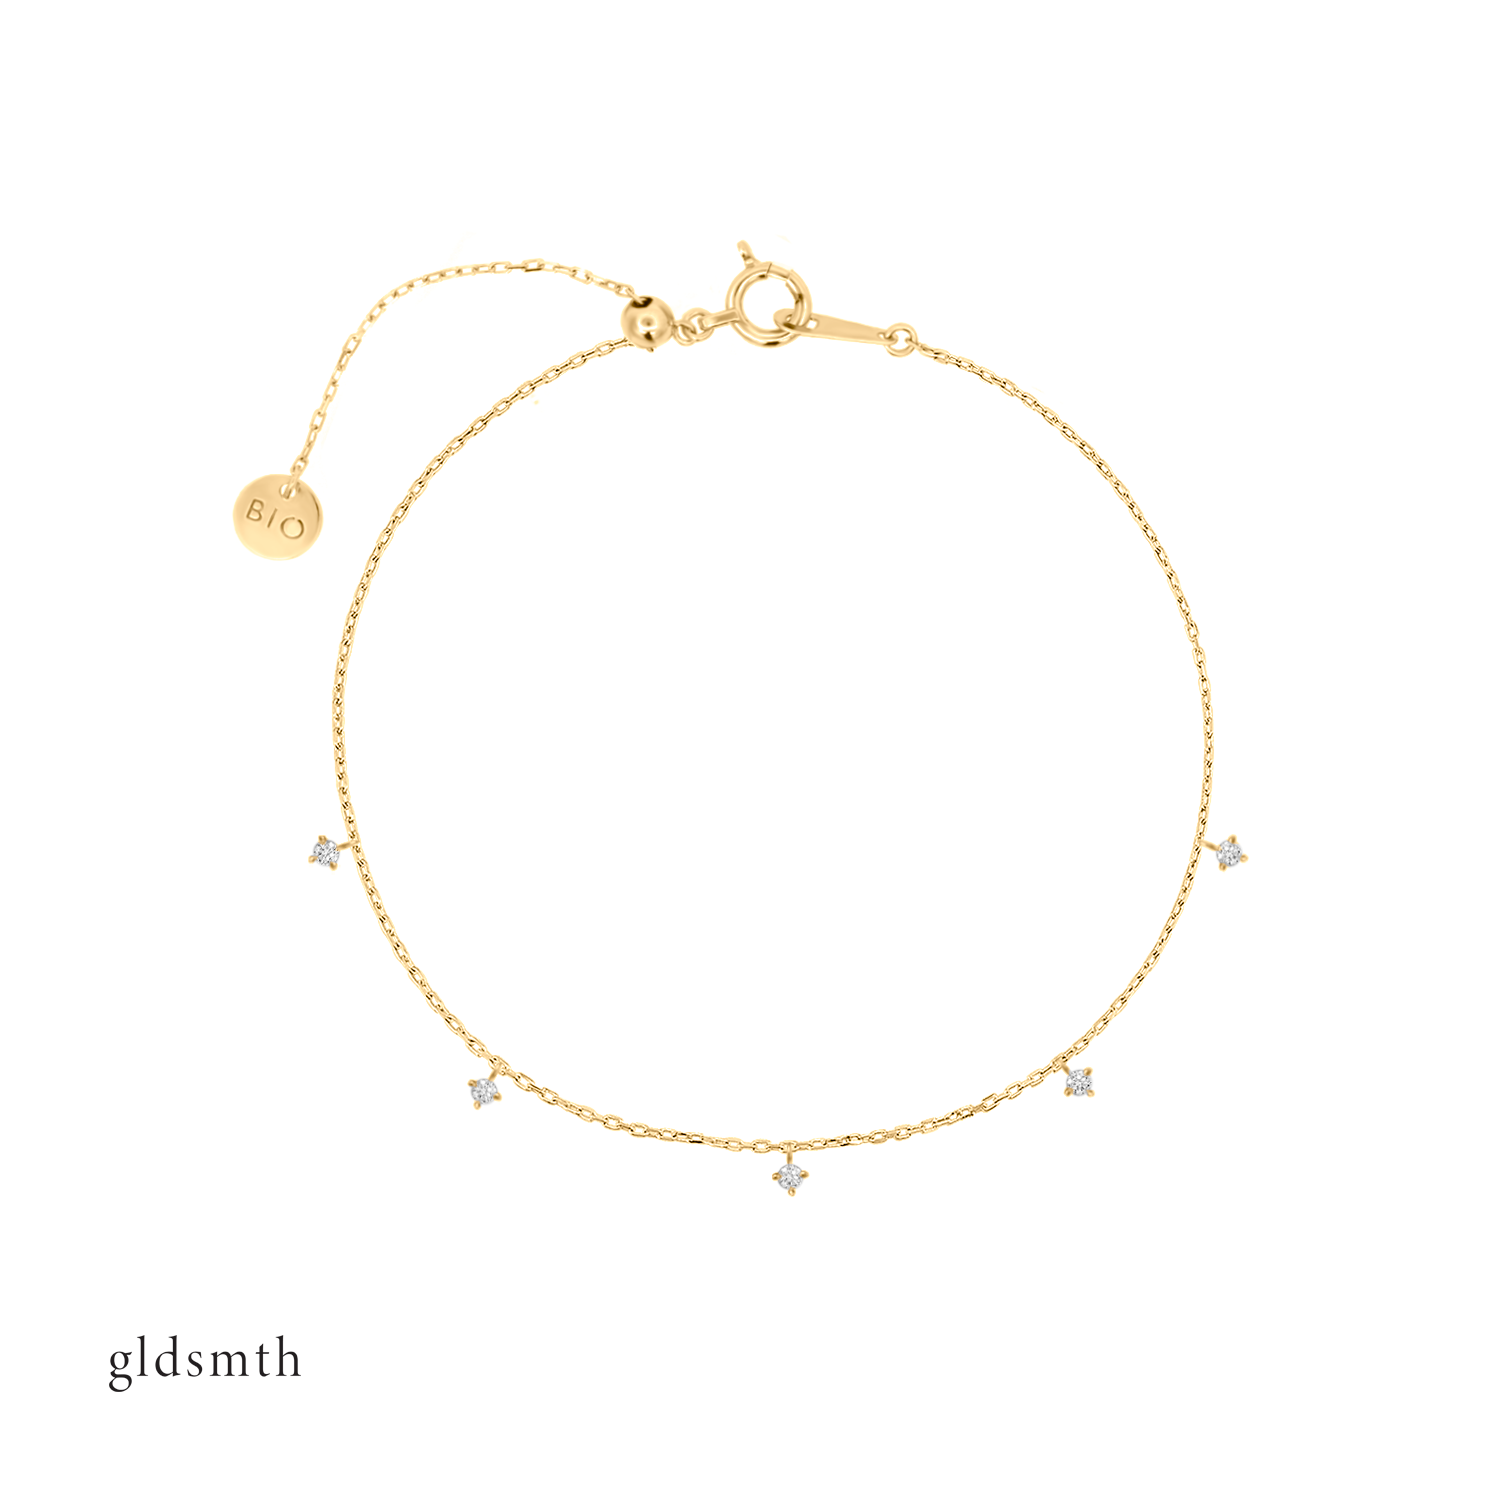 Graceful and delicate hand crafted 10k solid gold bracelet with conflict-free diamonds.